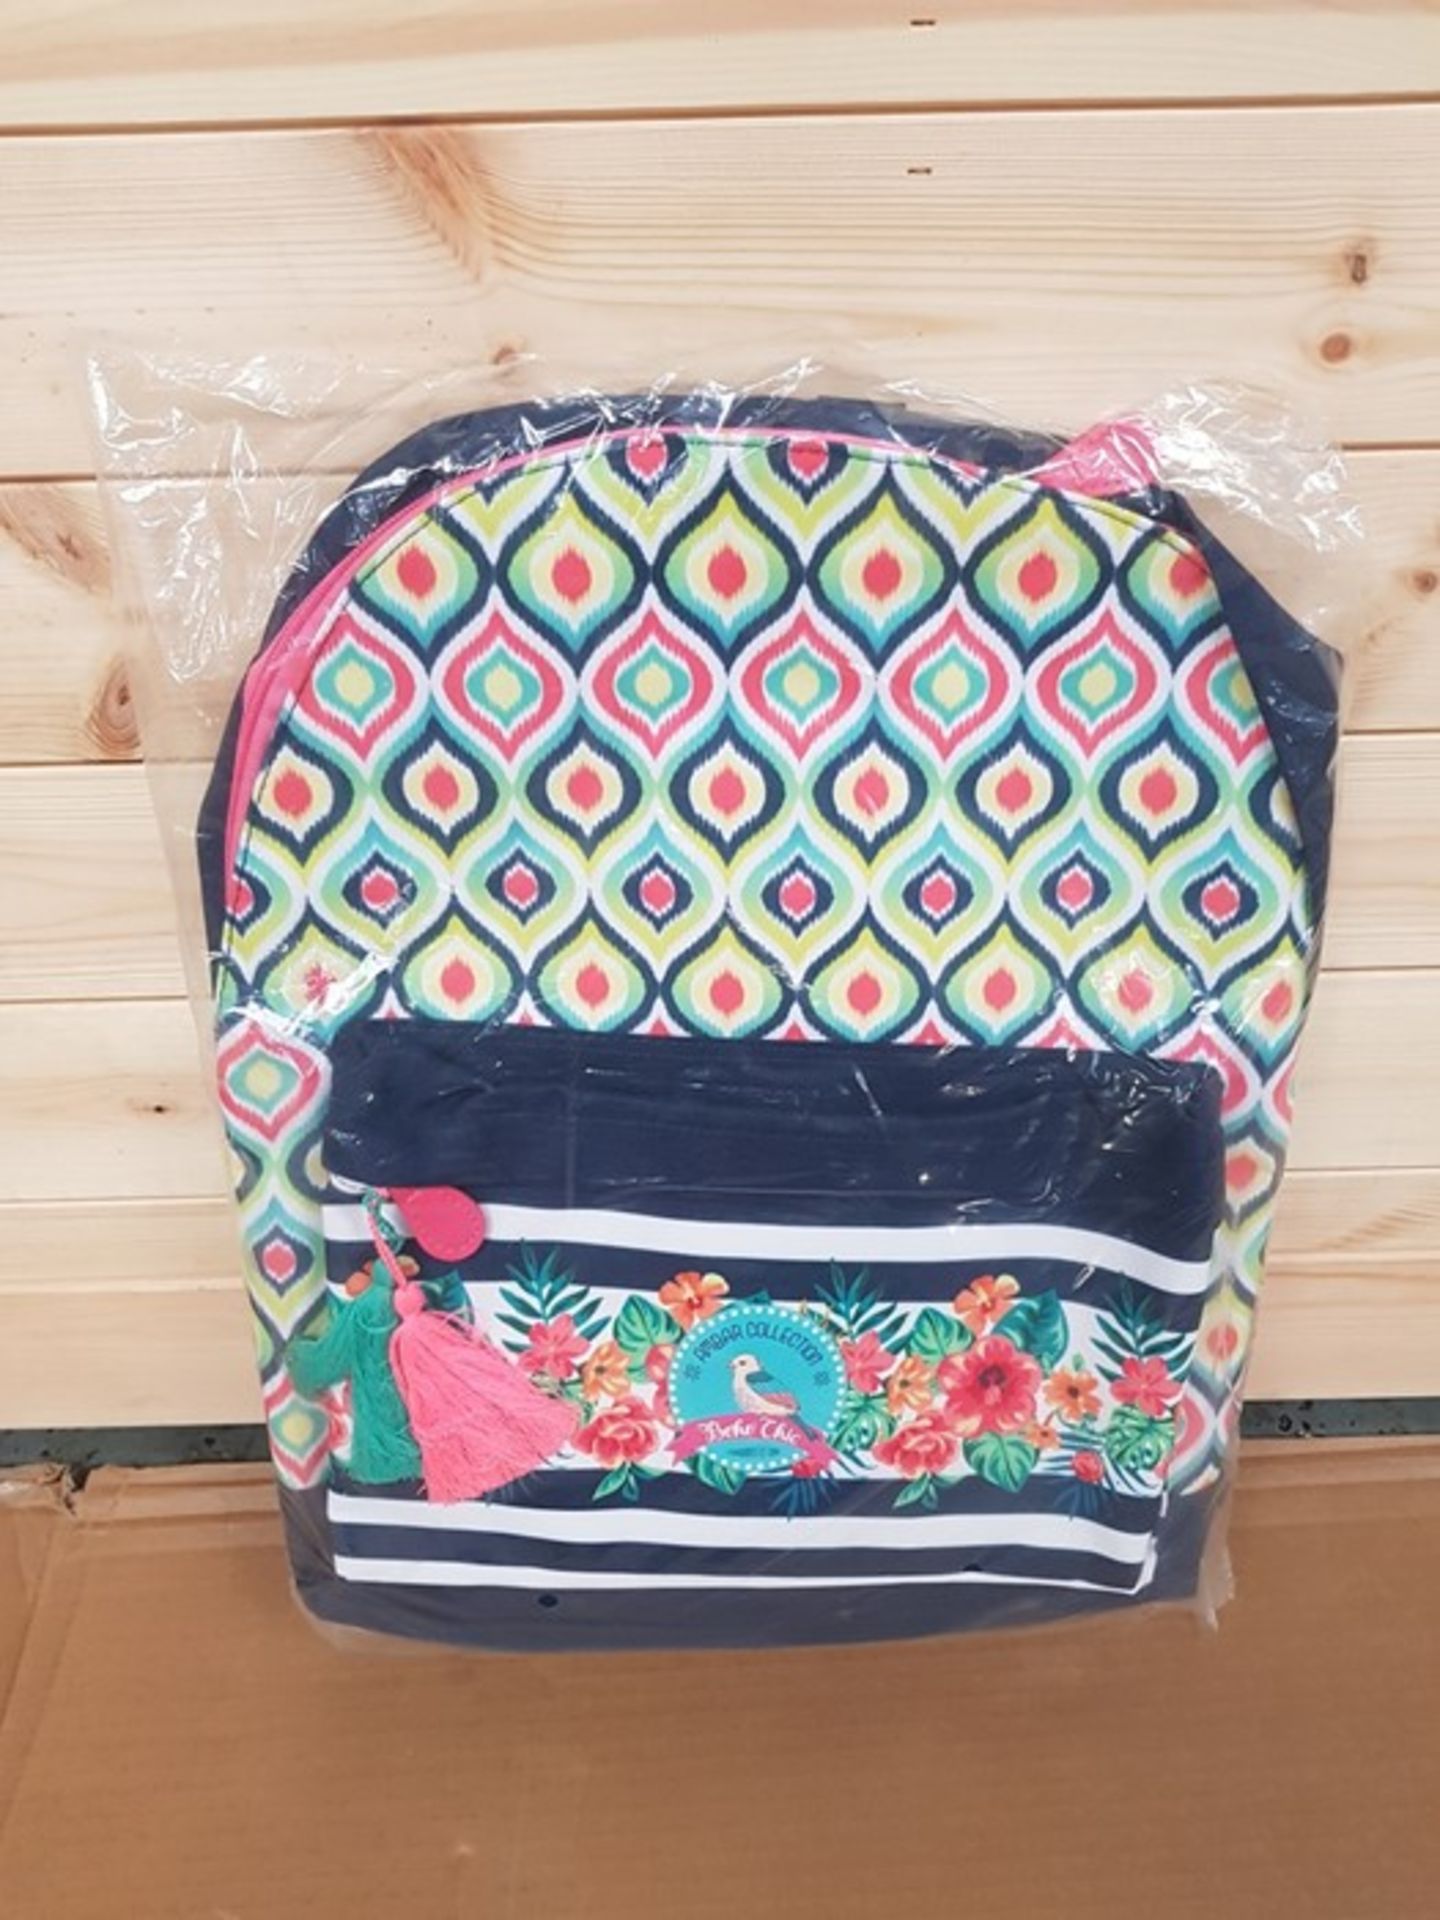 1 AS NEW BAGGED AMBAR MOCHILA BOHO CHIC SCHOOL BACKPACK / RRP £30.00 (PUBLIC VIEWING AVAILABLE)